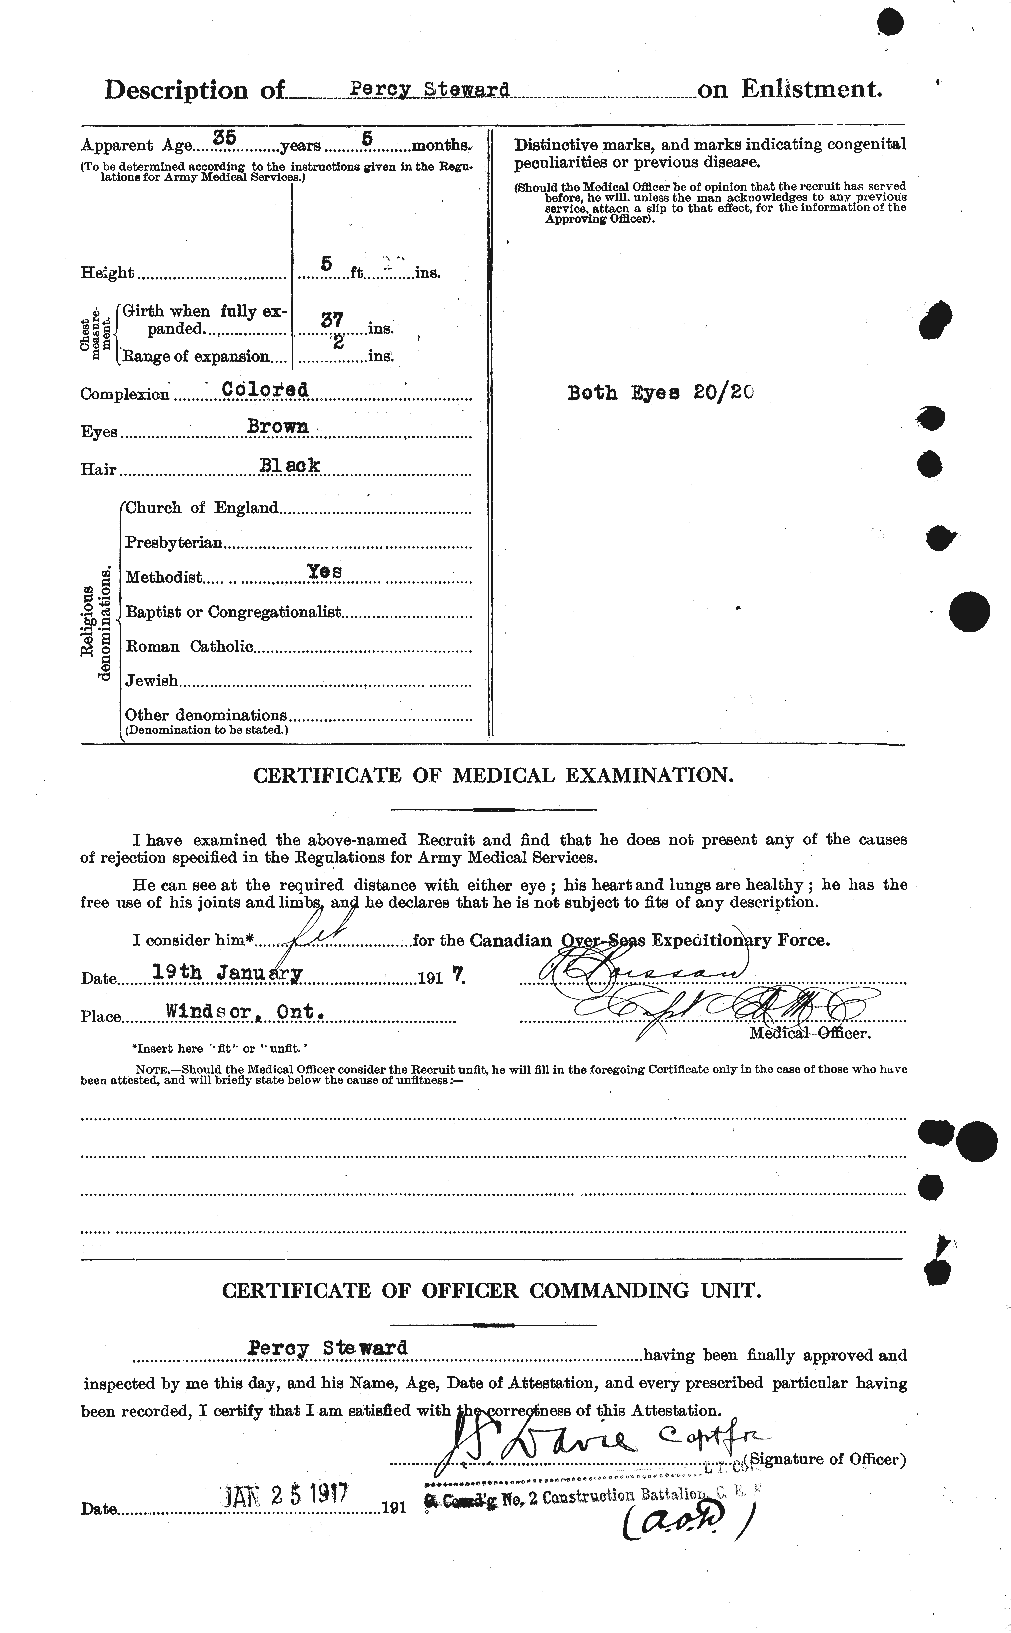 Personnel Records of the First World War - CEF 118724b